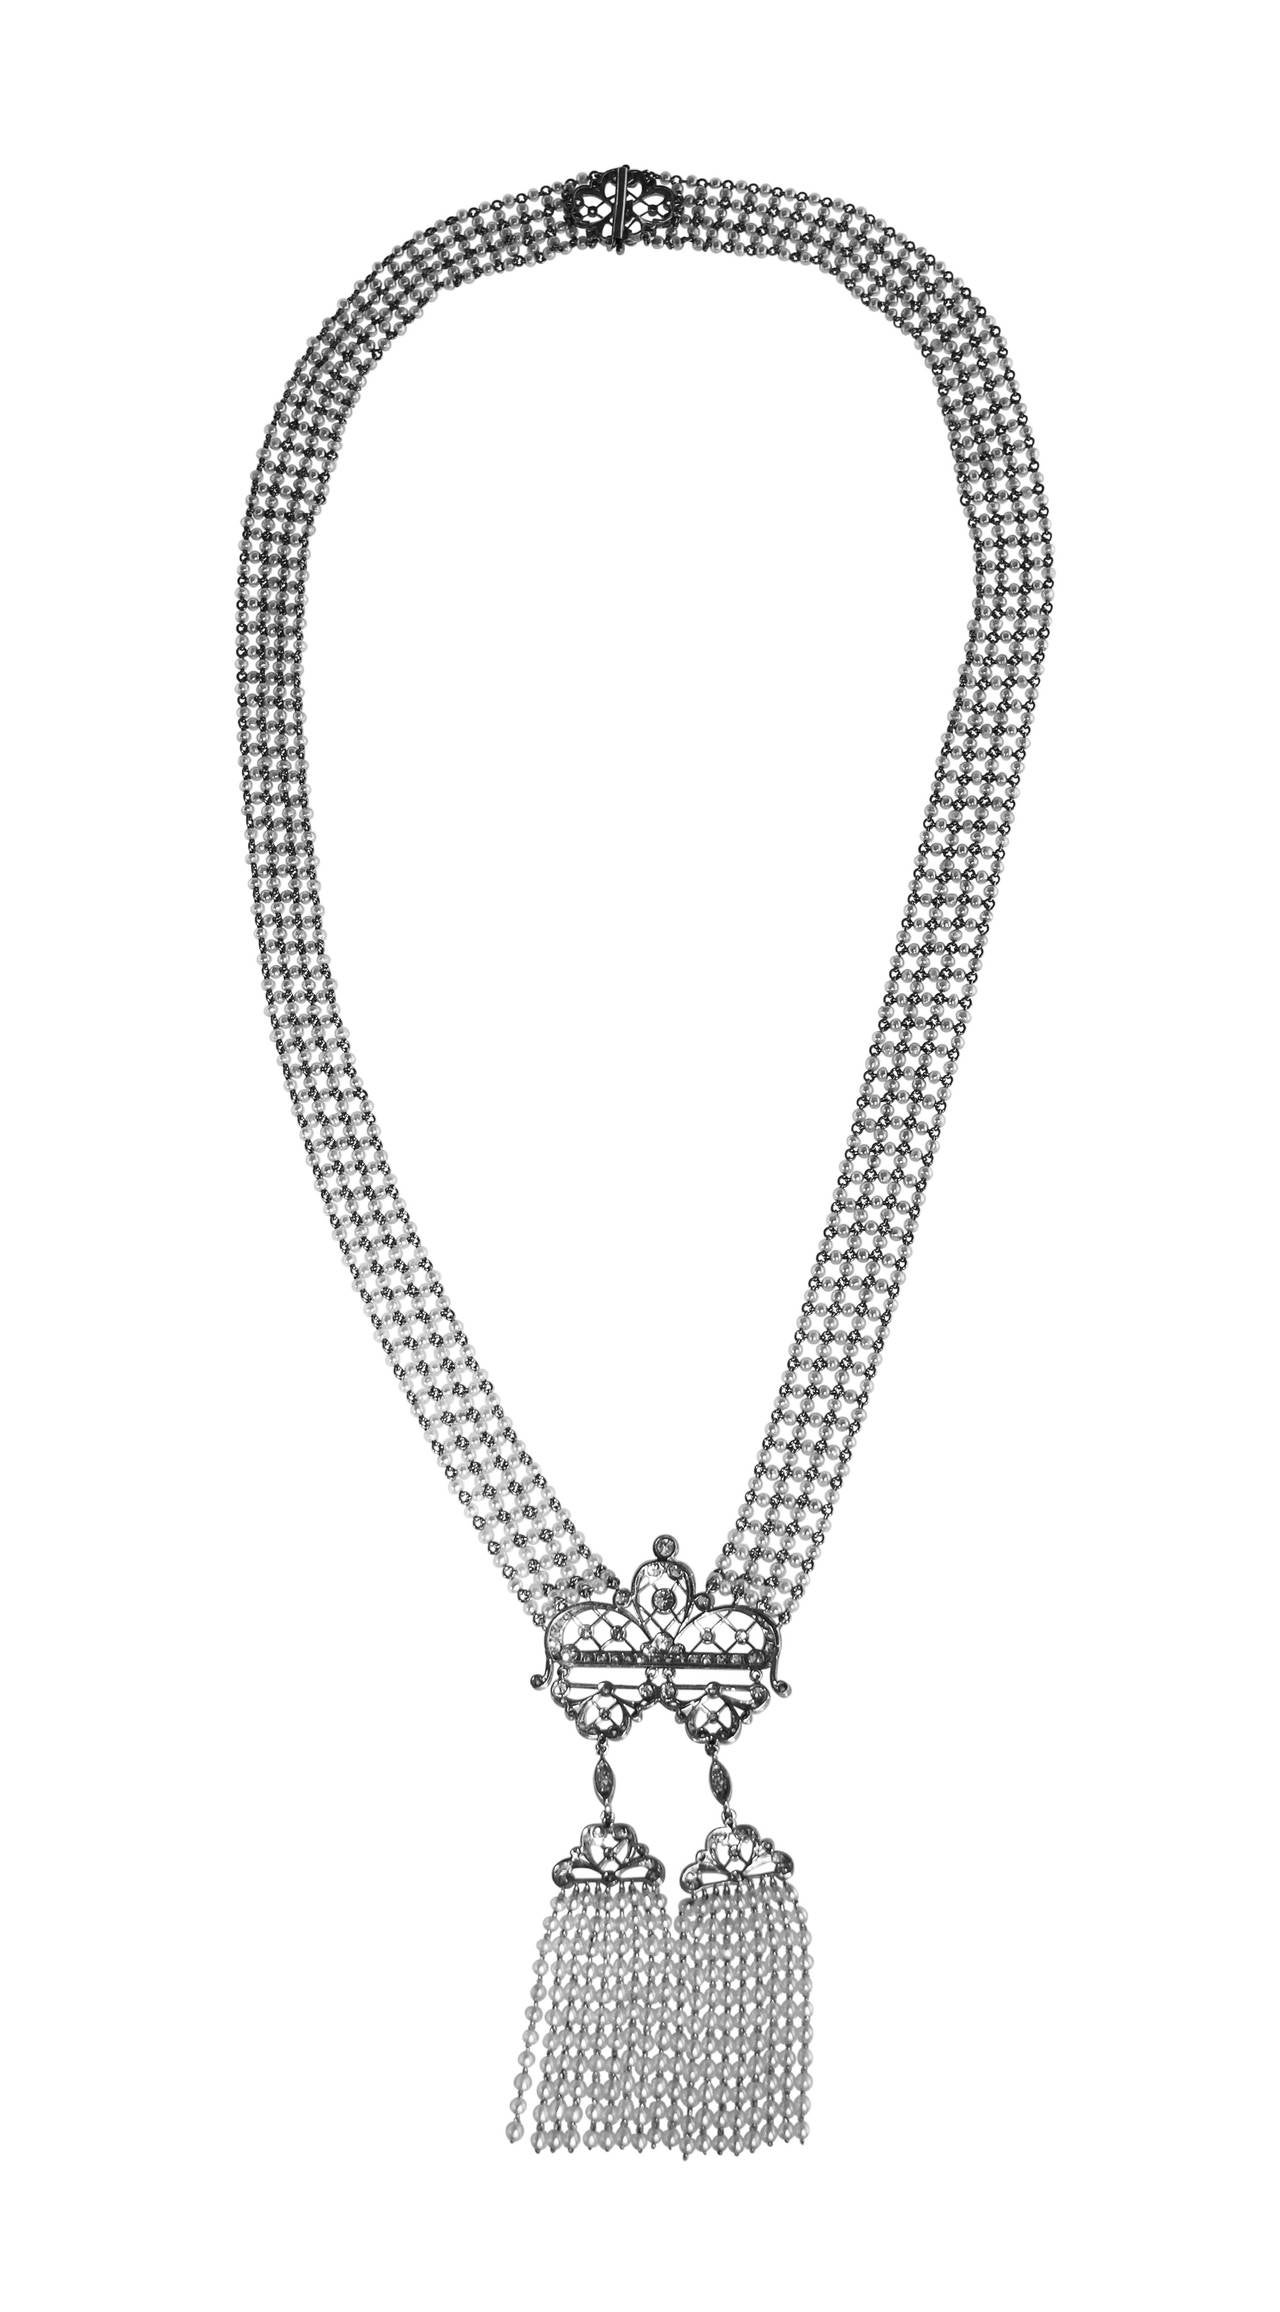 An Edwardian platinum, diamond and seed pearl sautoir necklace, designed as a seven row lattice seed pearl necklace supporting an openwork pendant of scroll and knife-edge design supporting two seed pearl tassels, completed by an openwork clasp of